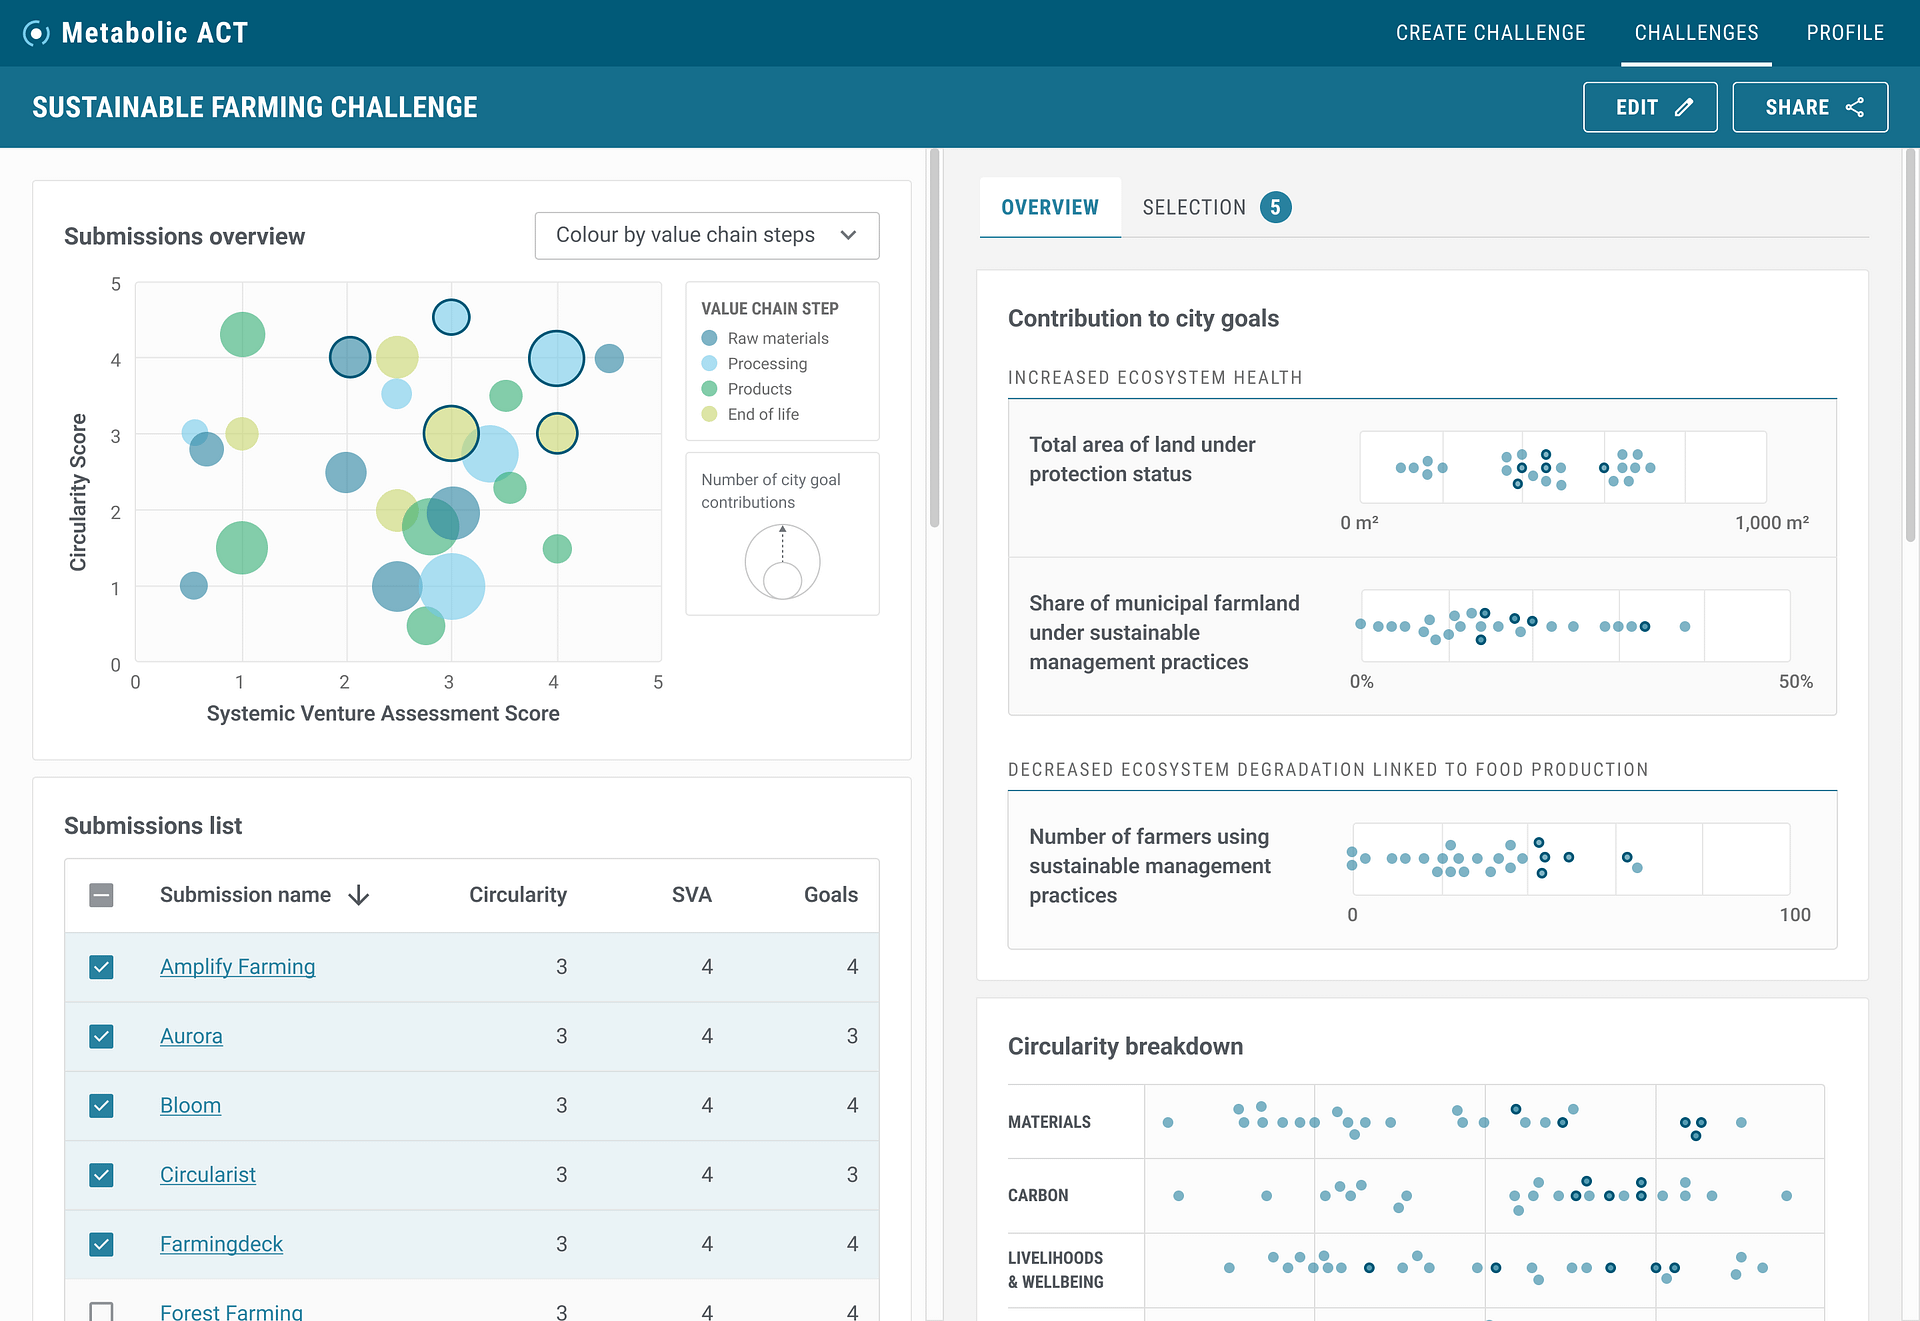 Initial overview dashboard